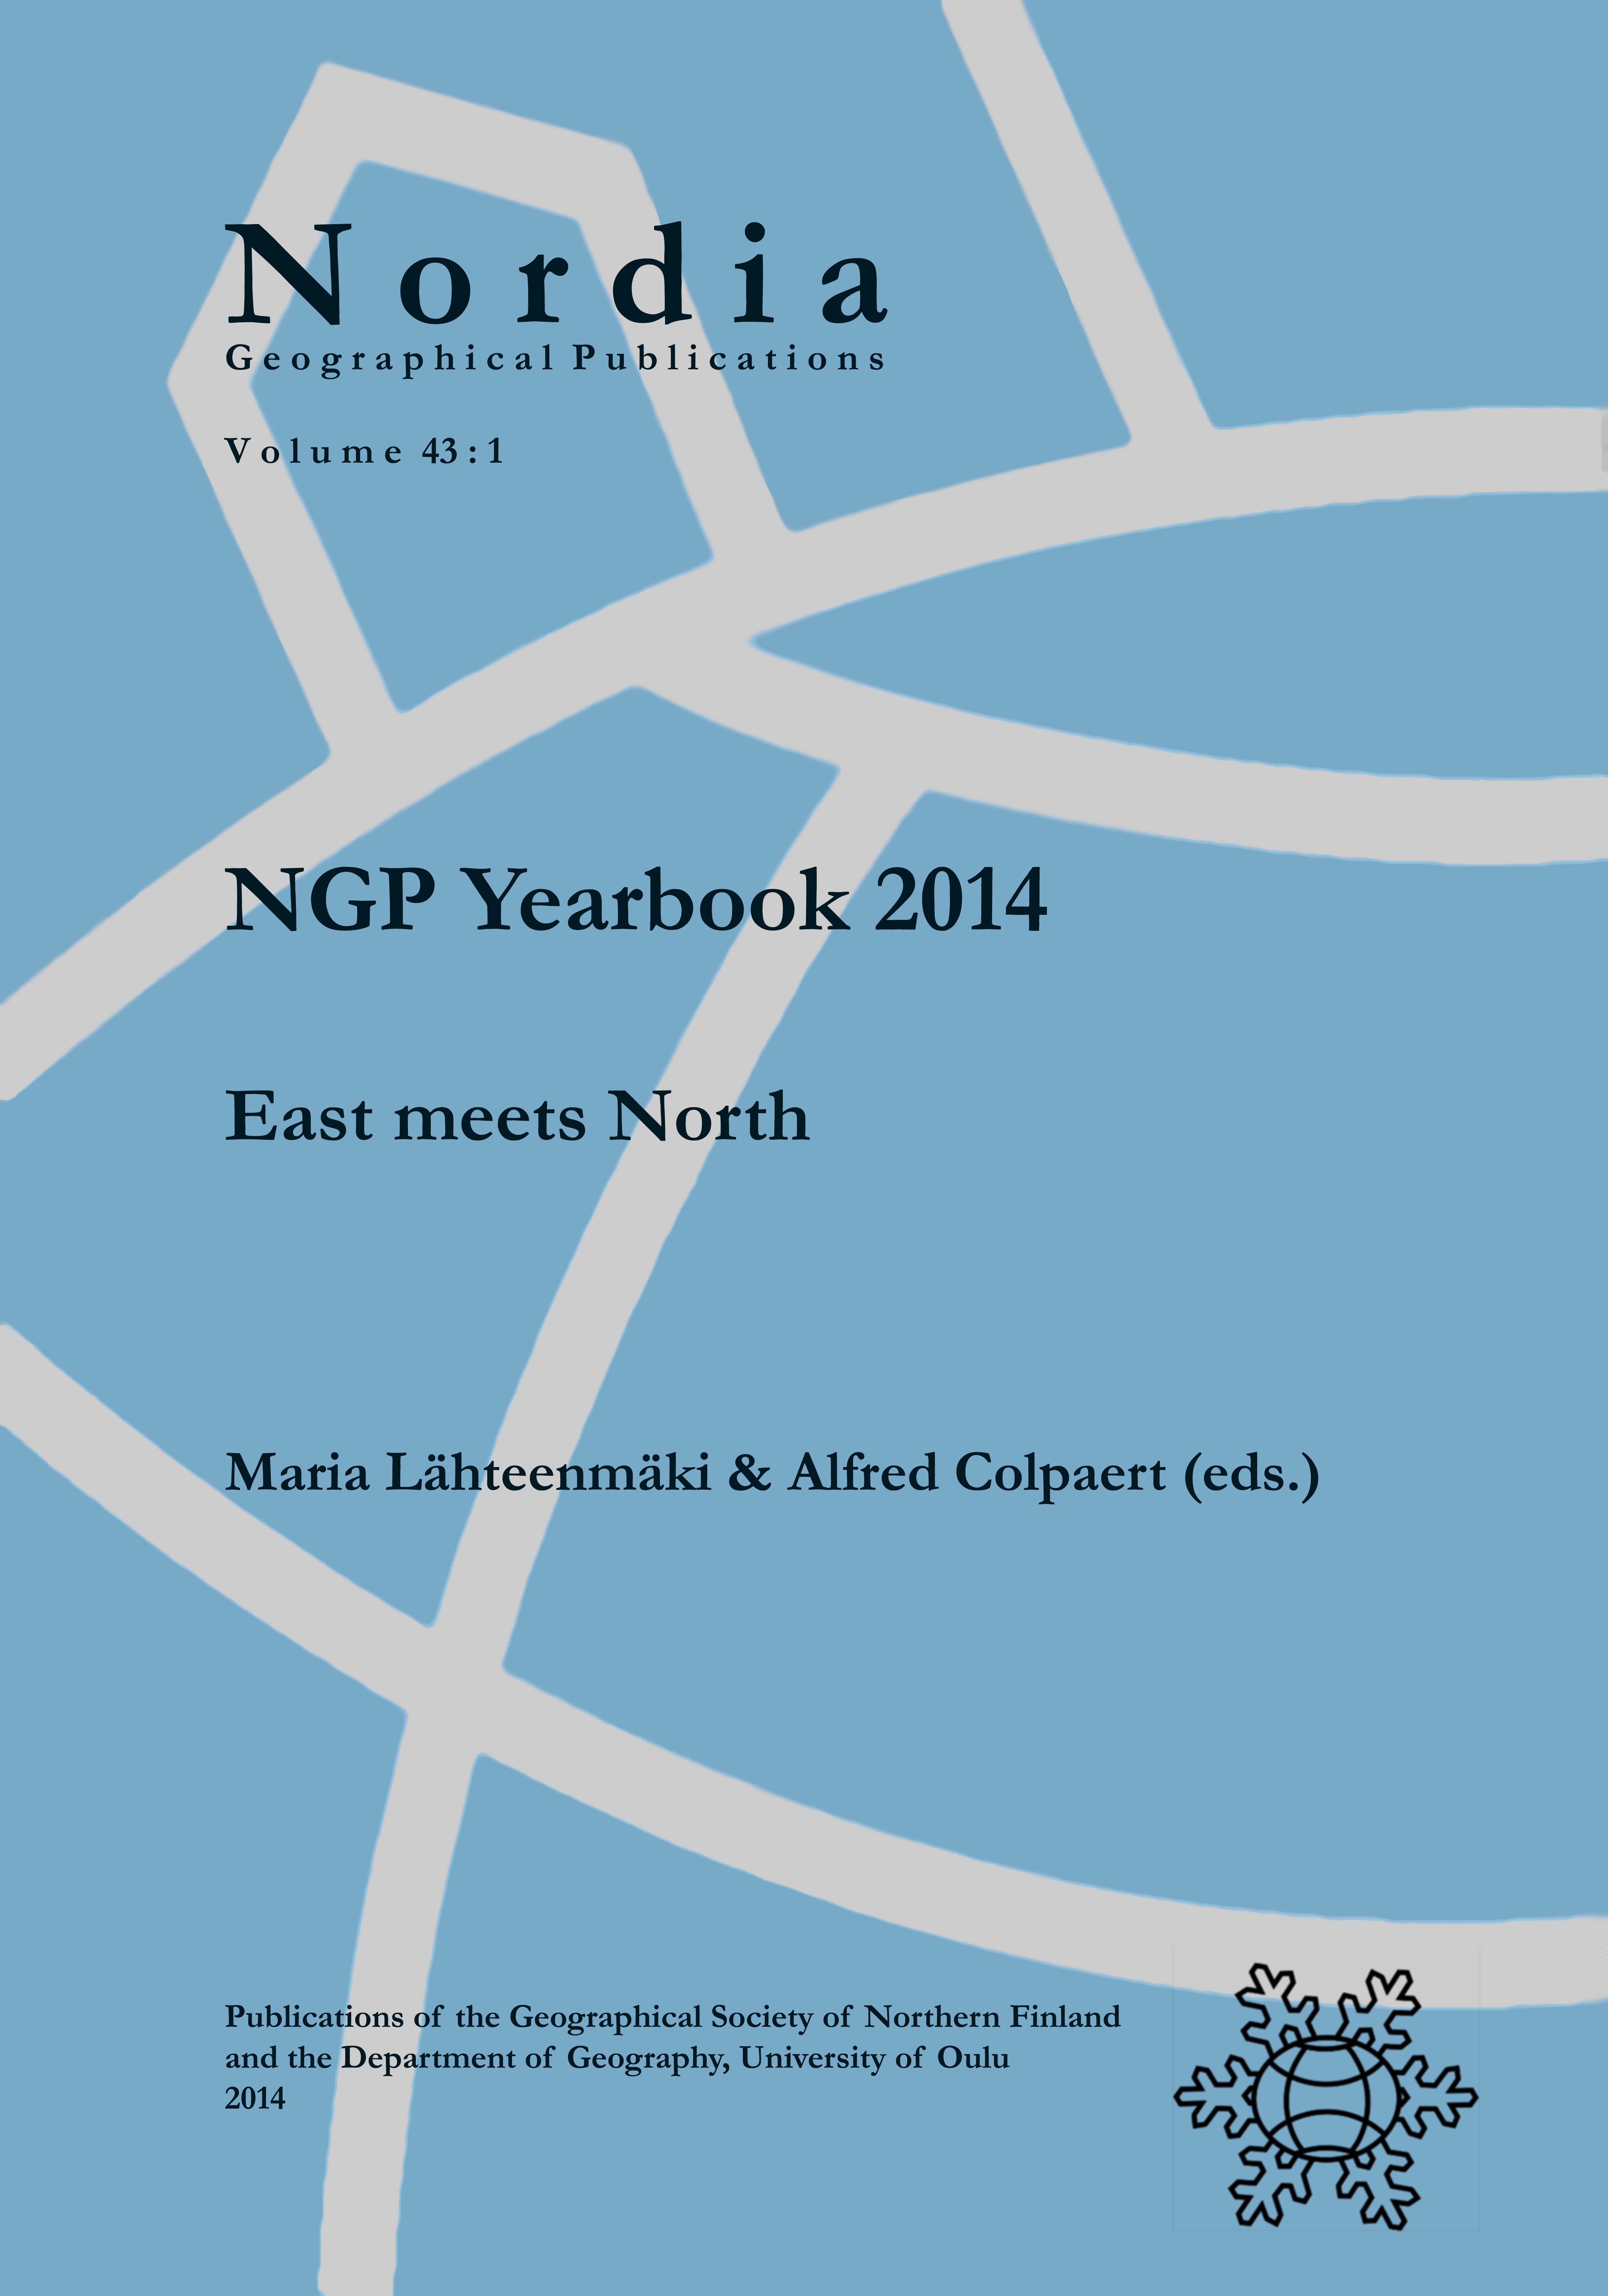 					View Vol. 43 No. 1: NGP Yearbook 2014: East meets North
				